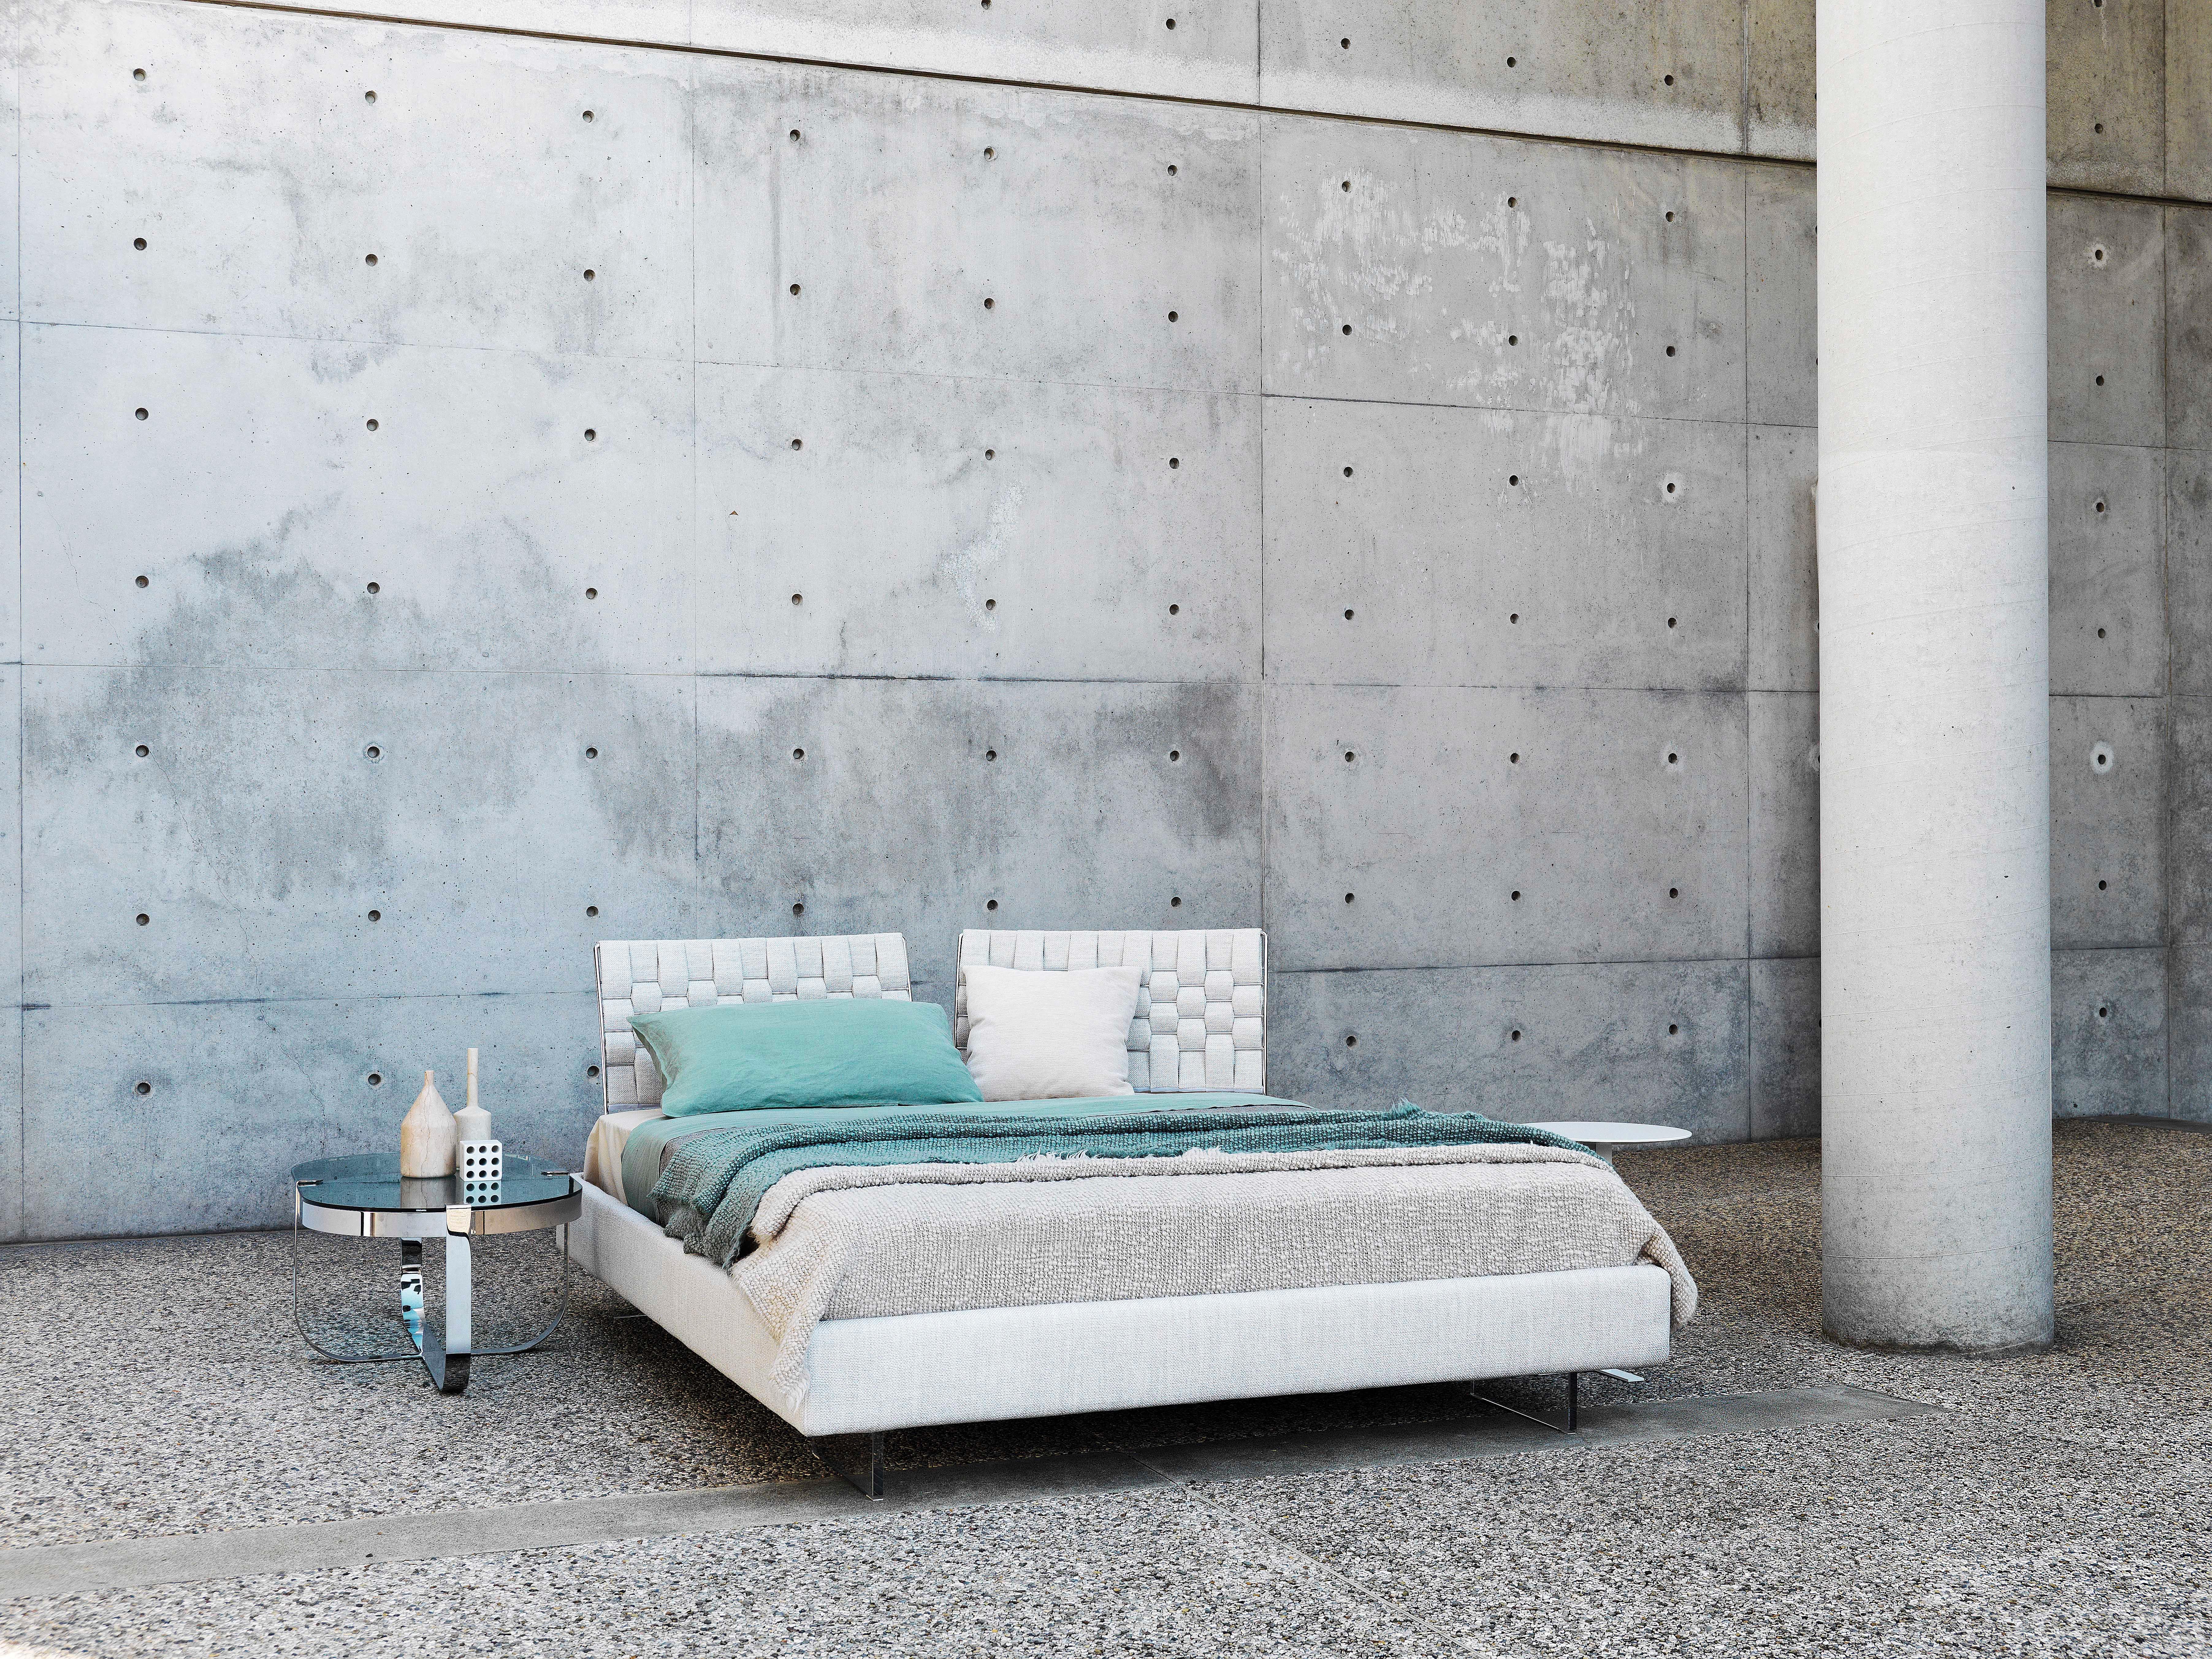 Limes T Large follows the same stylistic line of the Limes collection and is characterized by a functional integrated padded shelf, which depending on the panels positioning, can add an extra area to the headboard or footboard.

Born in 1953 he left